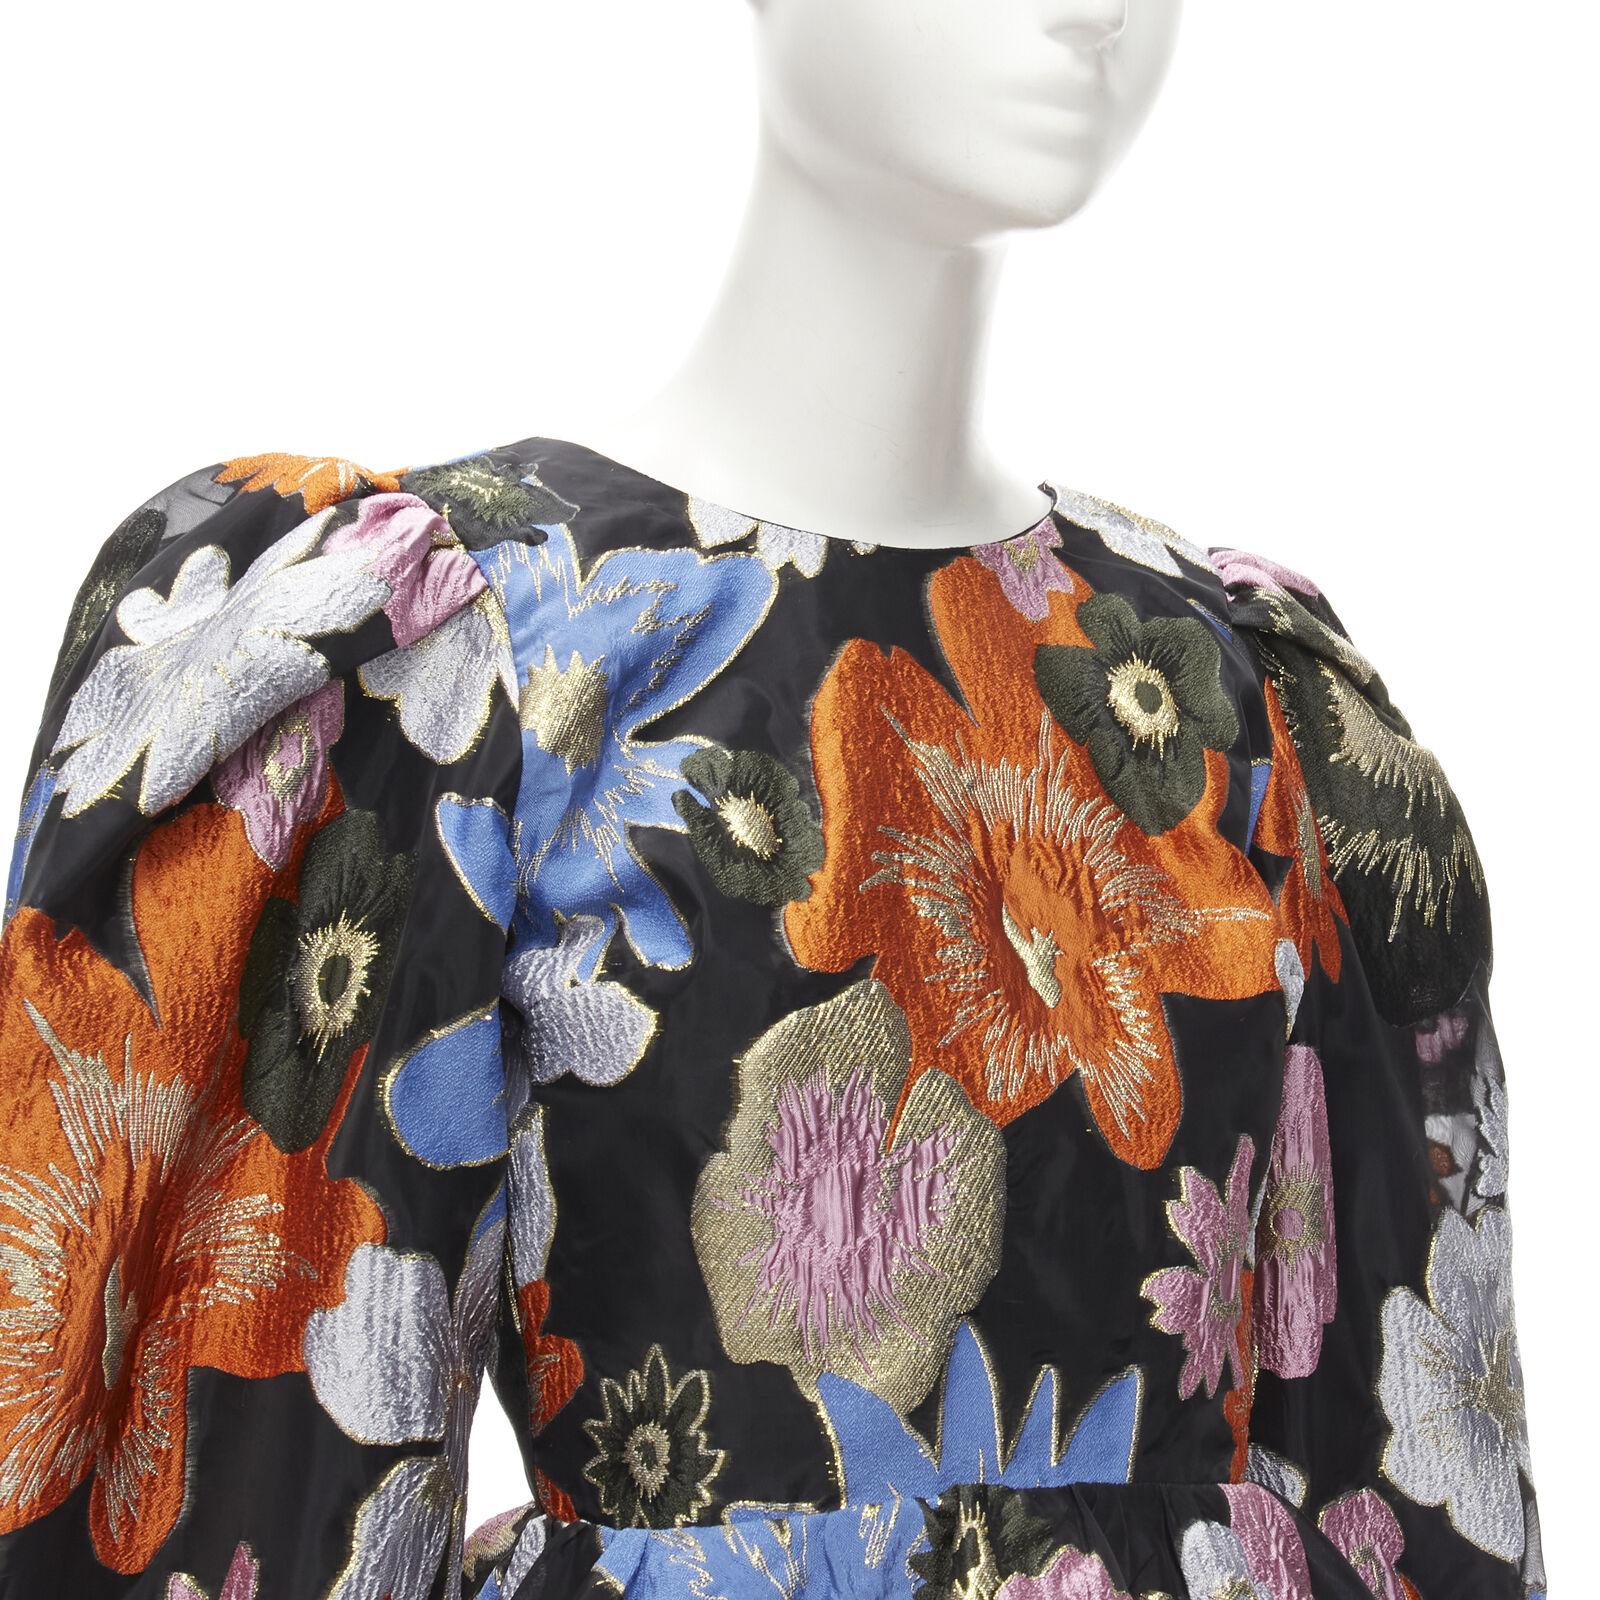 STINE GOYA orange blue floral jacquard peplum balloon sleeves top XS
Reference: AAWC/A00278
Brand: Stine Goya
Material: Polyester, Blend
Pattern: Floral
Closure: Zip
Lining: Fabric
Made in: China

CONDITION:
Condition: Excellent, this item was